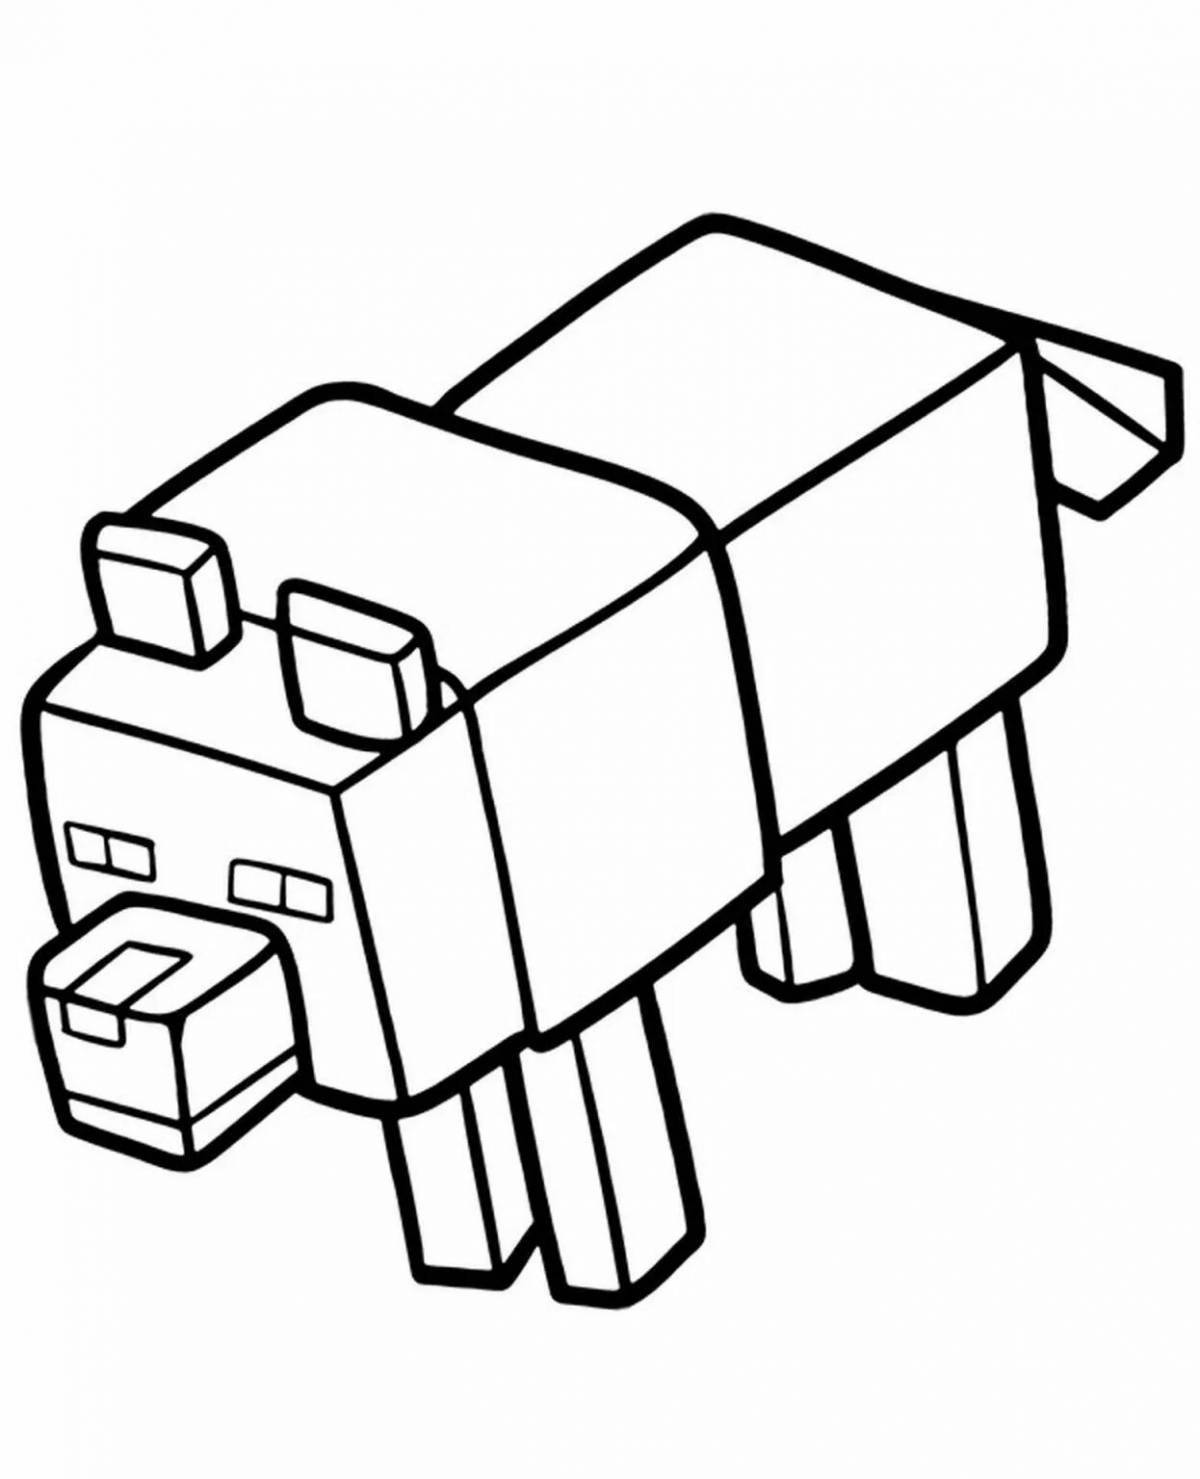 Minecraft irresistible cat coloring page